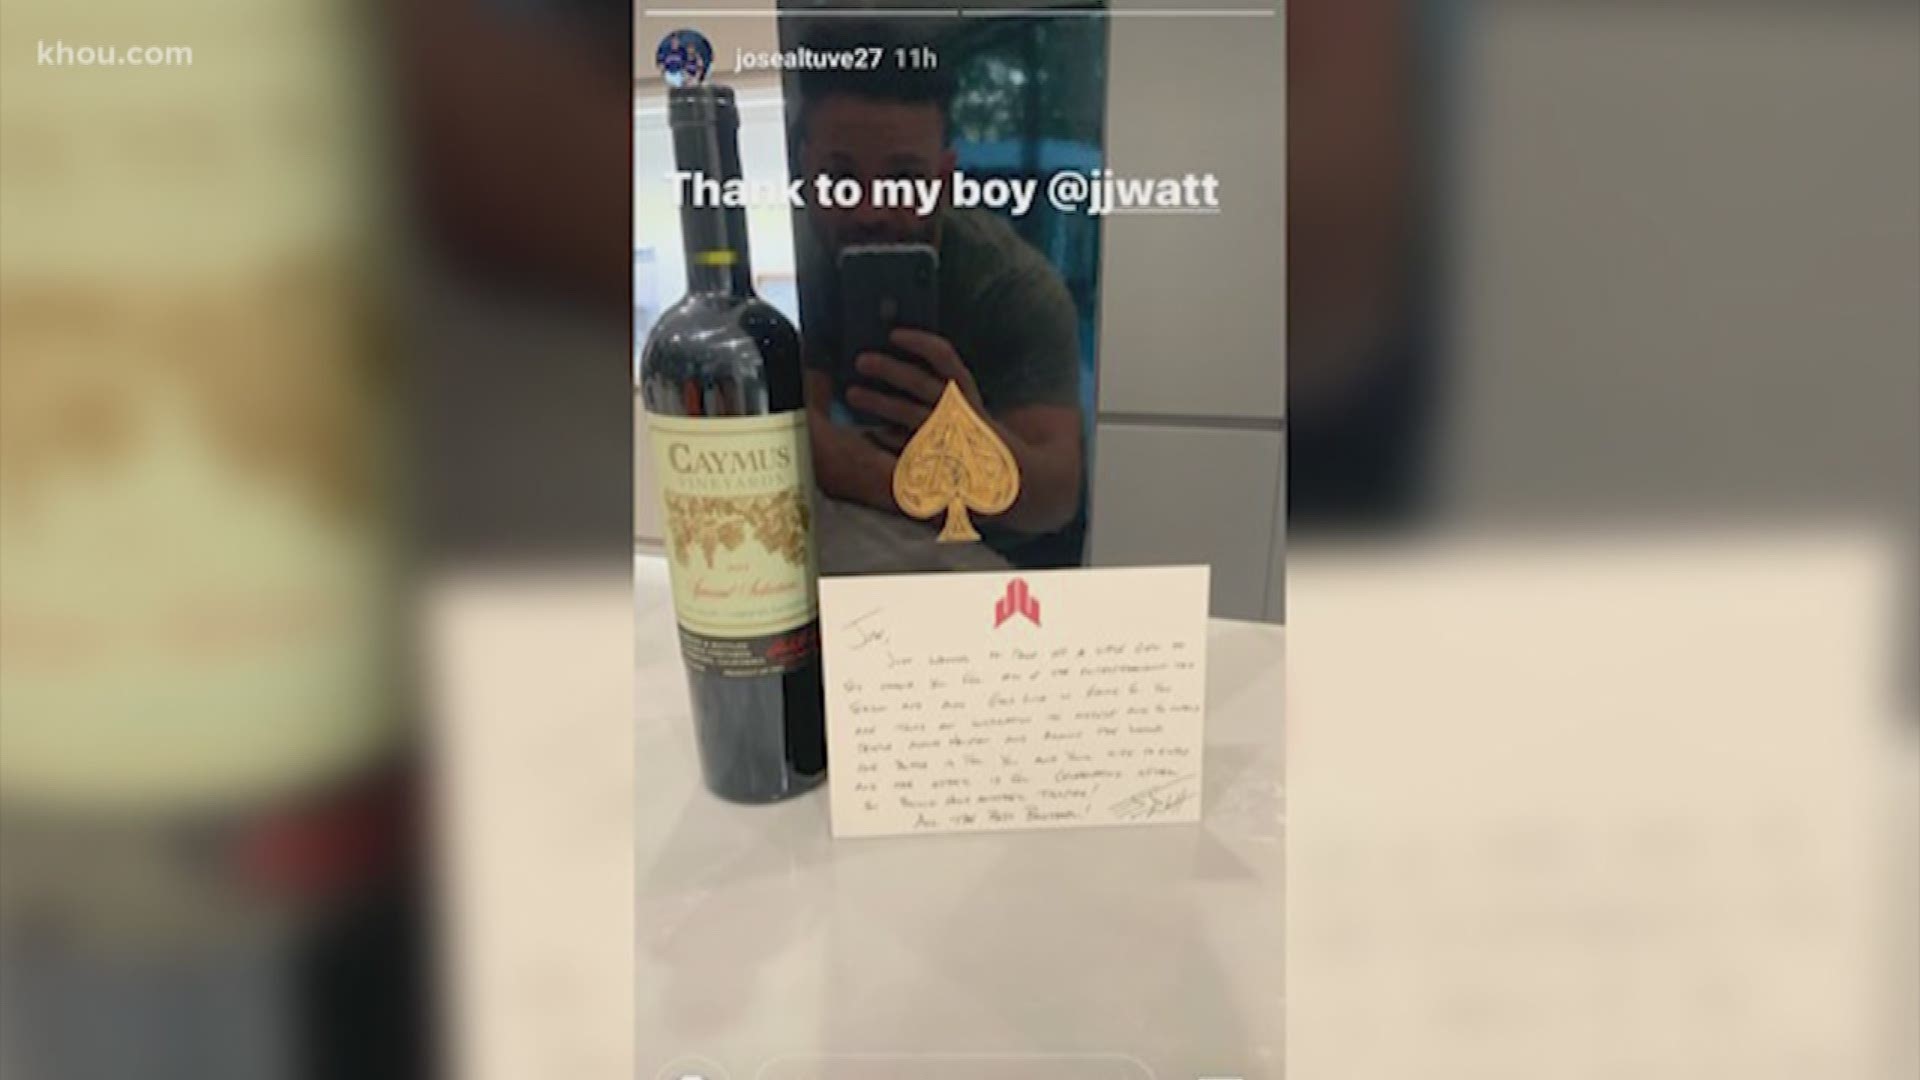 Texans star J.J. Watt sent a small gift with a special message to Astros star Jose Altuve as he prepares for Game 6 of the World Series.